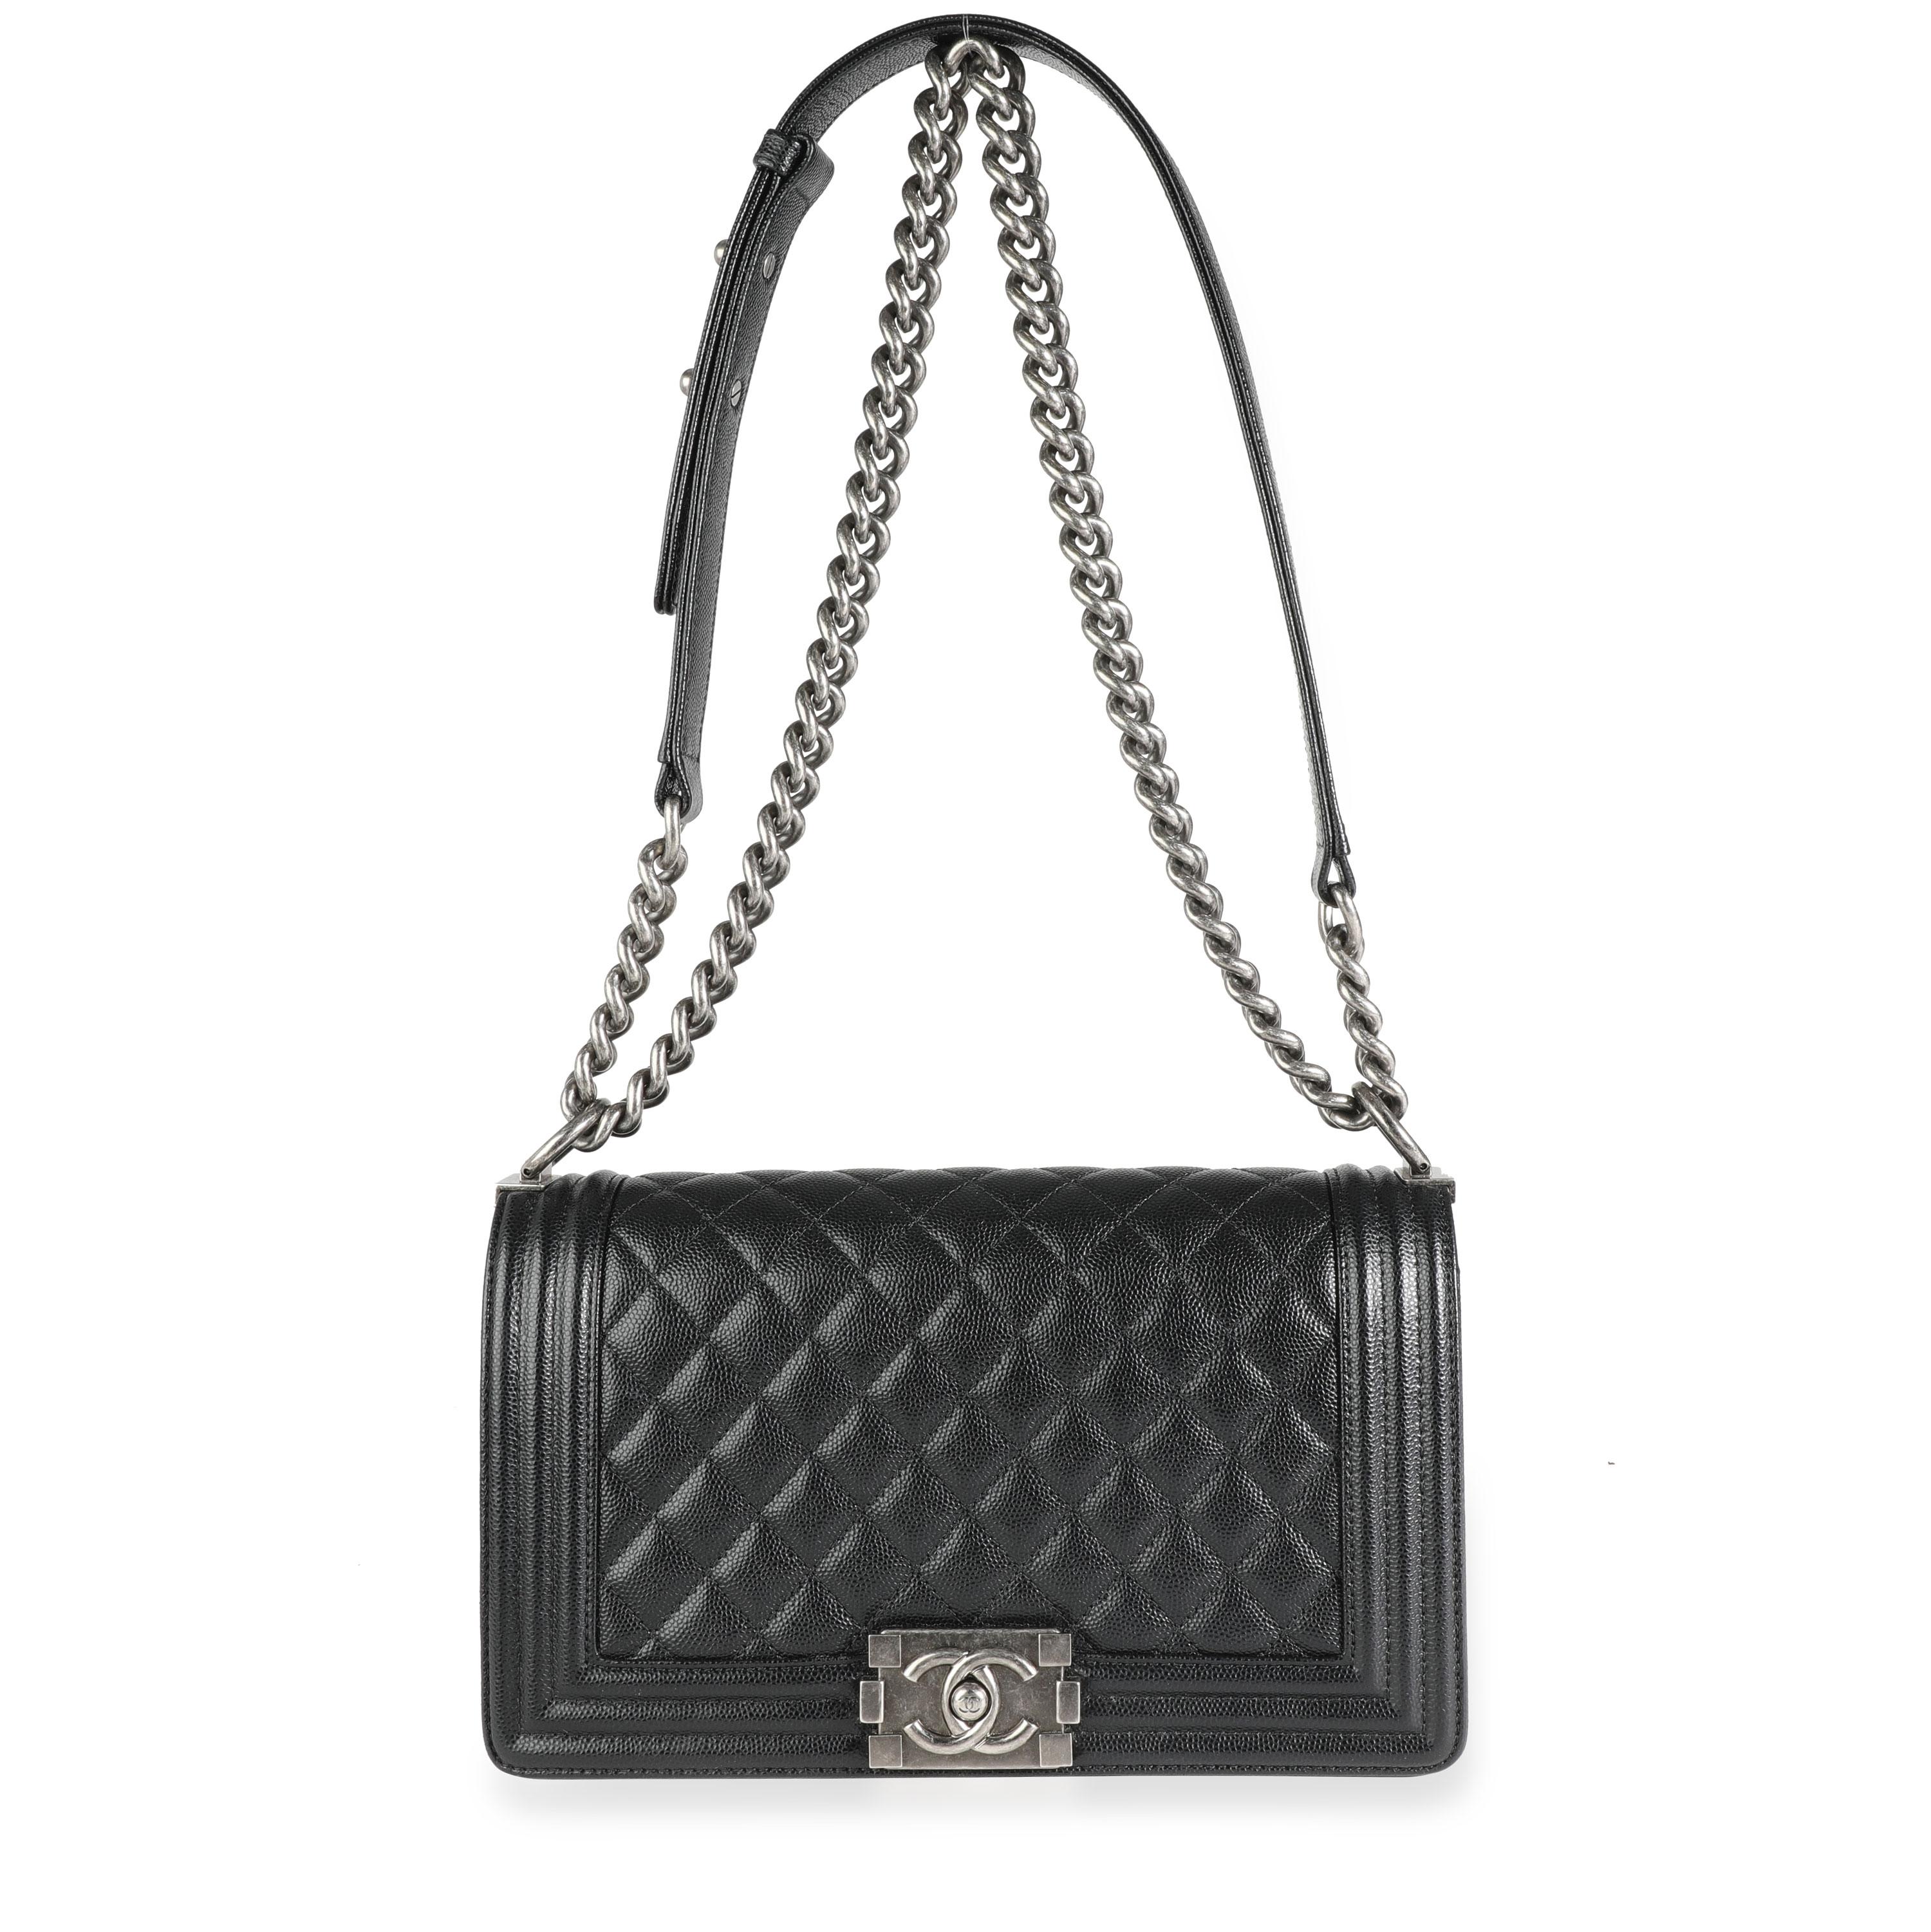 Chanel Black Caviar Quilted Old Medium Boy Bag
SKU: 113094
MSRP: USD 5,900.00
Condition: Pre-owned (3000)
Condition Description: The Boy bag is easily one of Karl Lagerfeld's most popular designs for Chanel. Inspired by Coco's first love, Boy Capel,